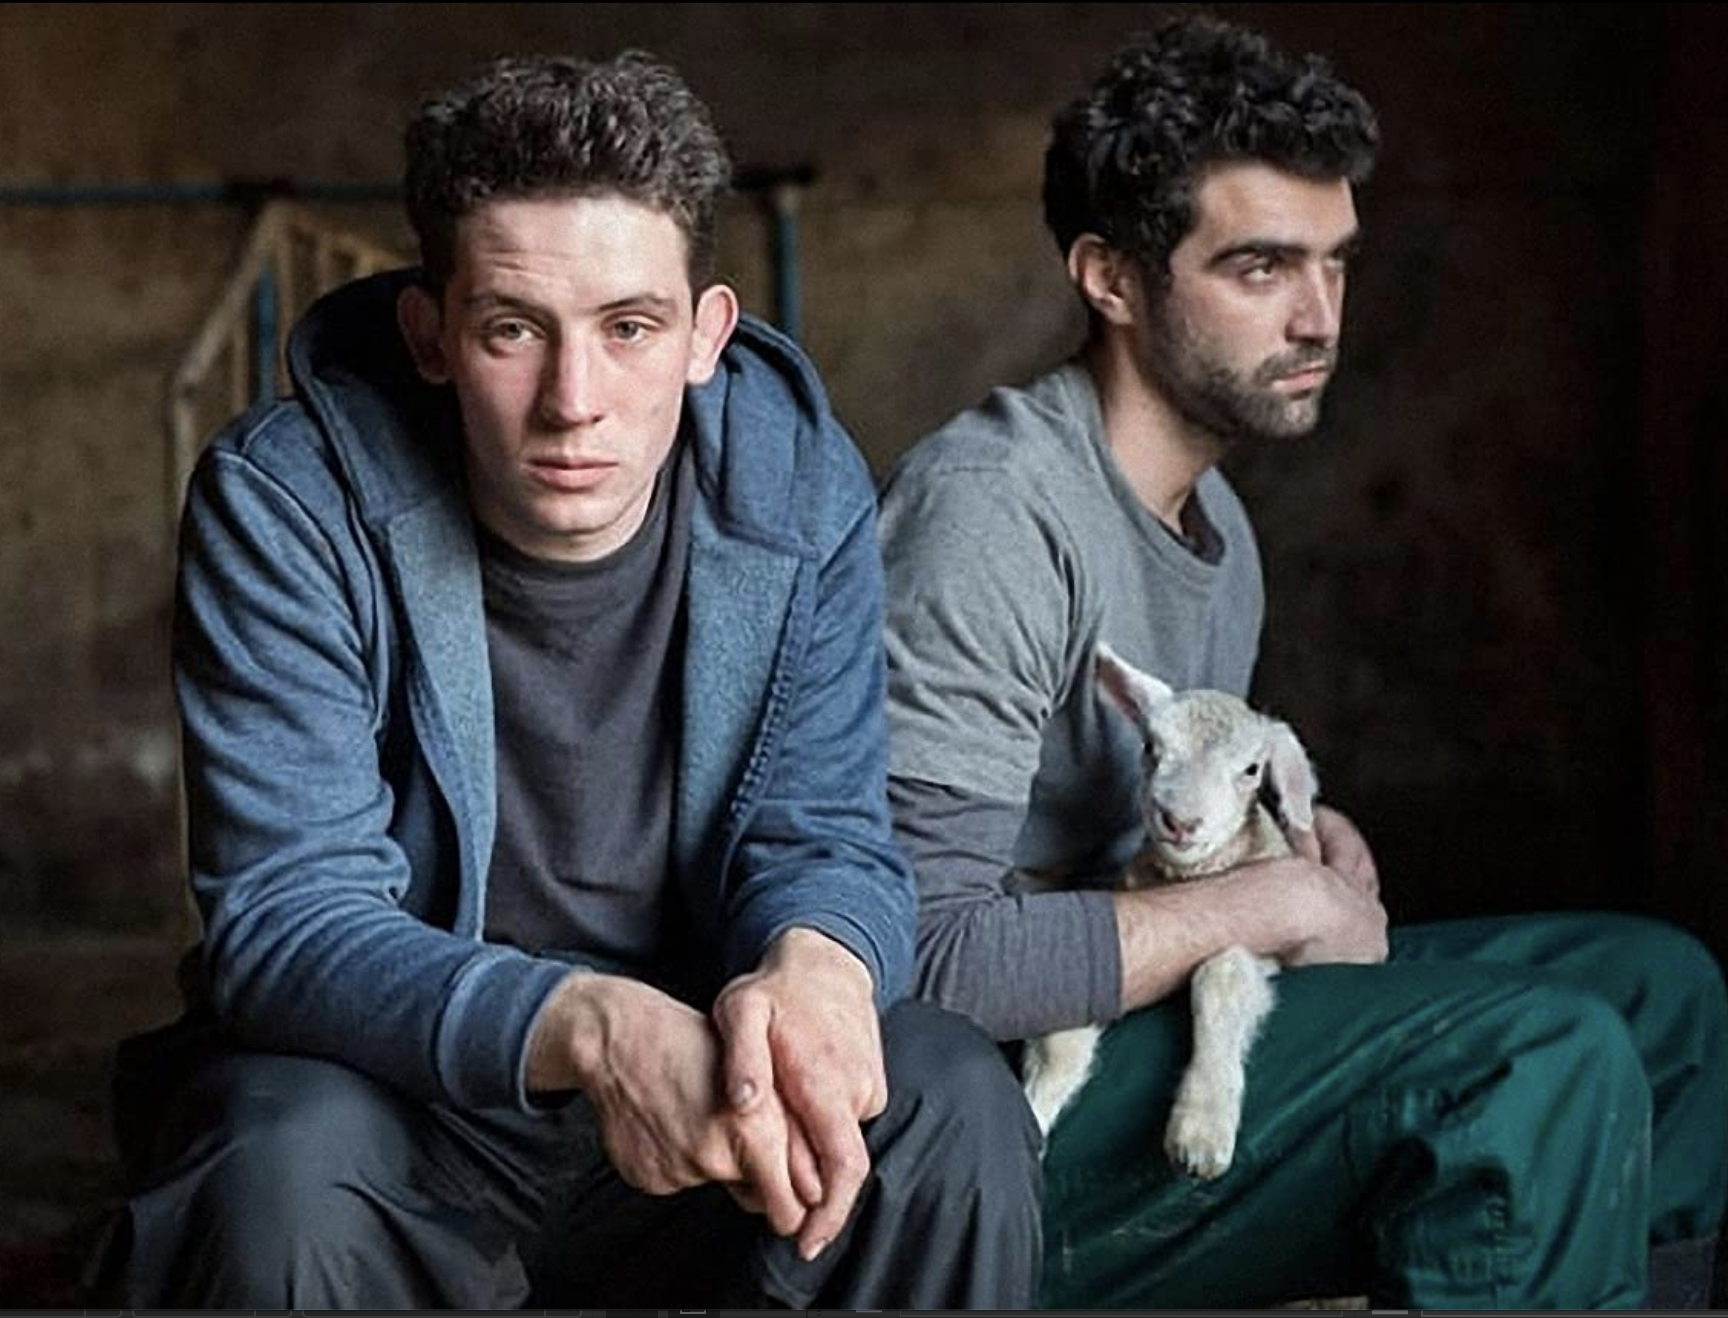 Watch God's Own Country 2022 Online Free